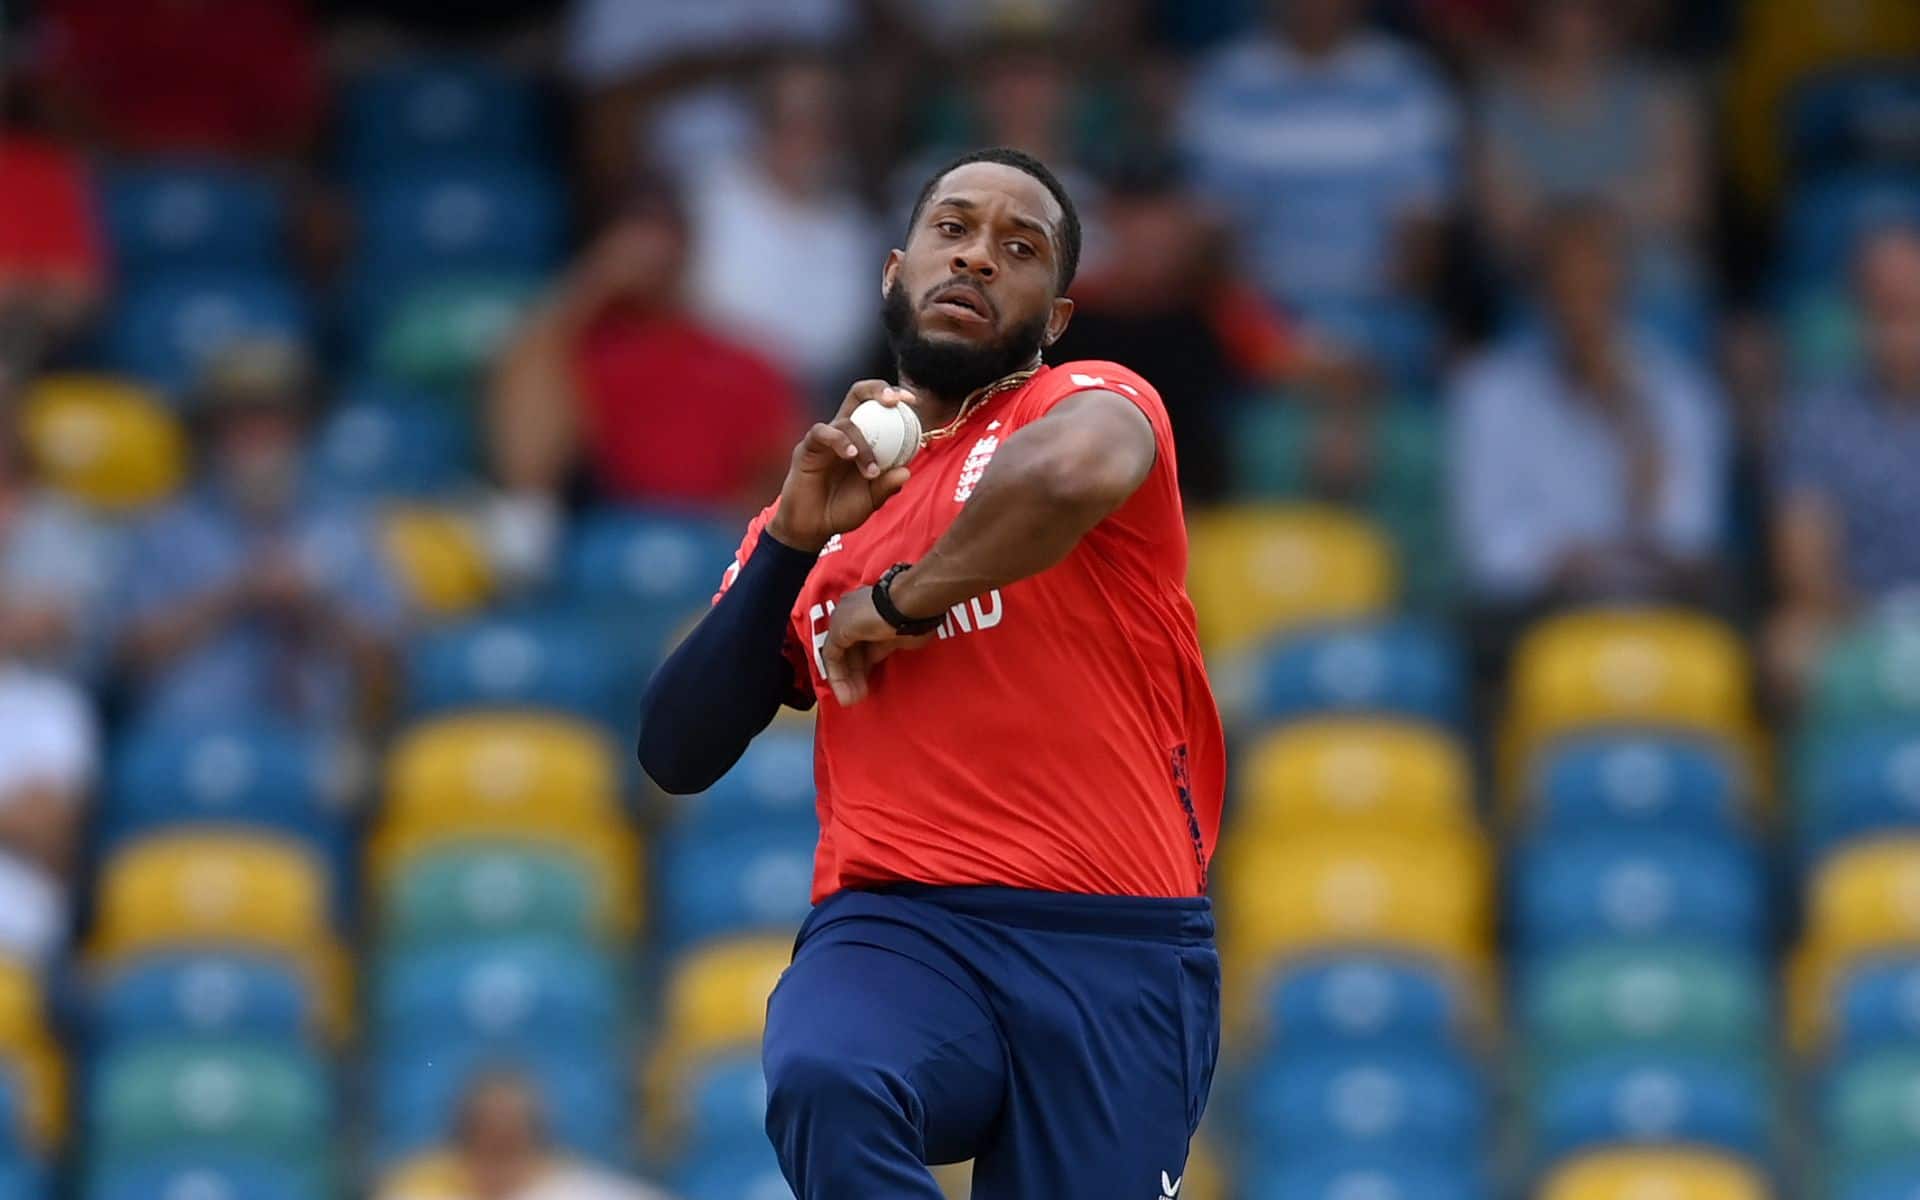 Chris Jordan Becomes Only The Second English Bowler To Achieve 'This' Feat